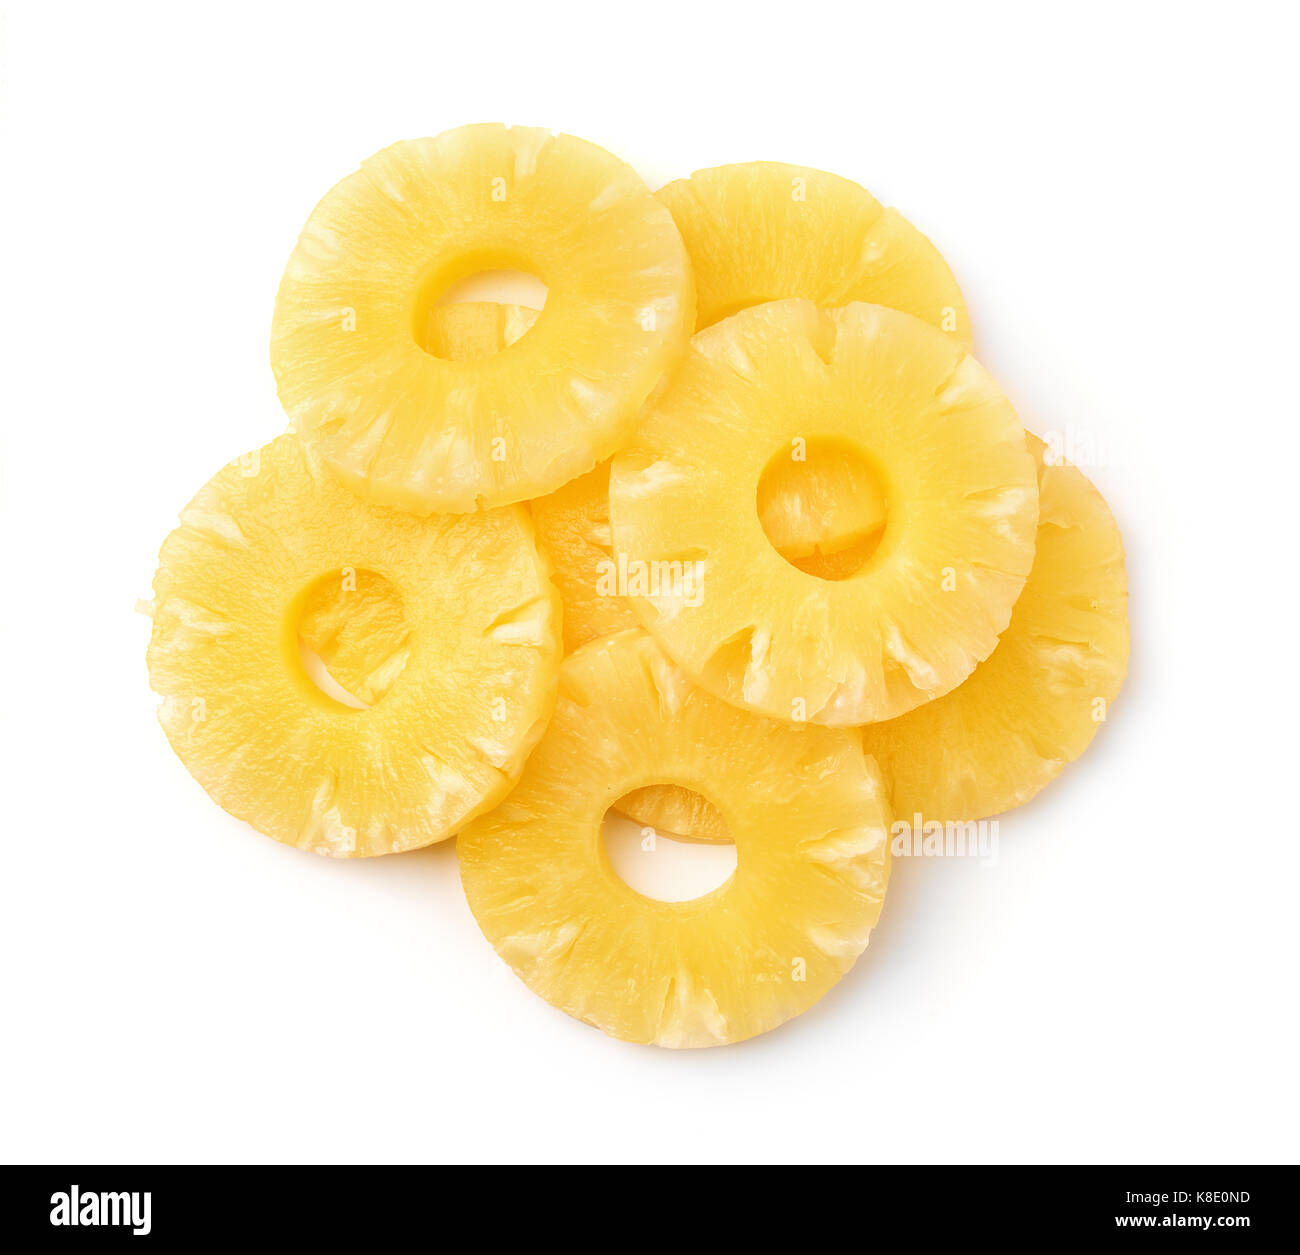 Top view of canned pineapple rings isolated on white Stock Photo